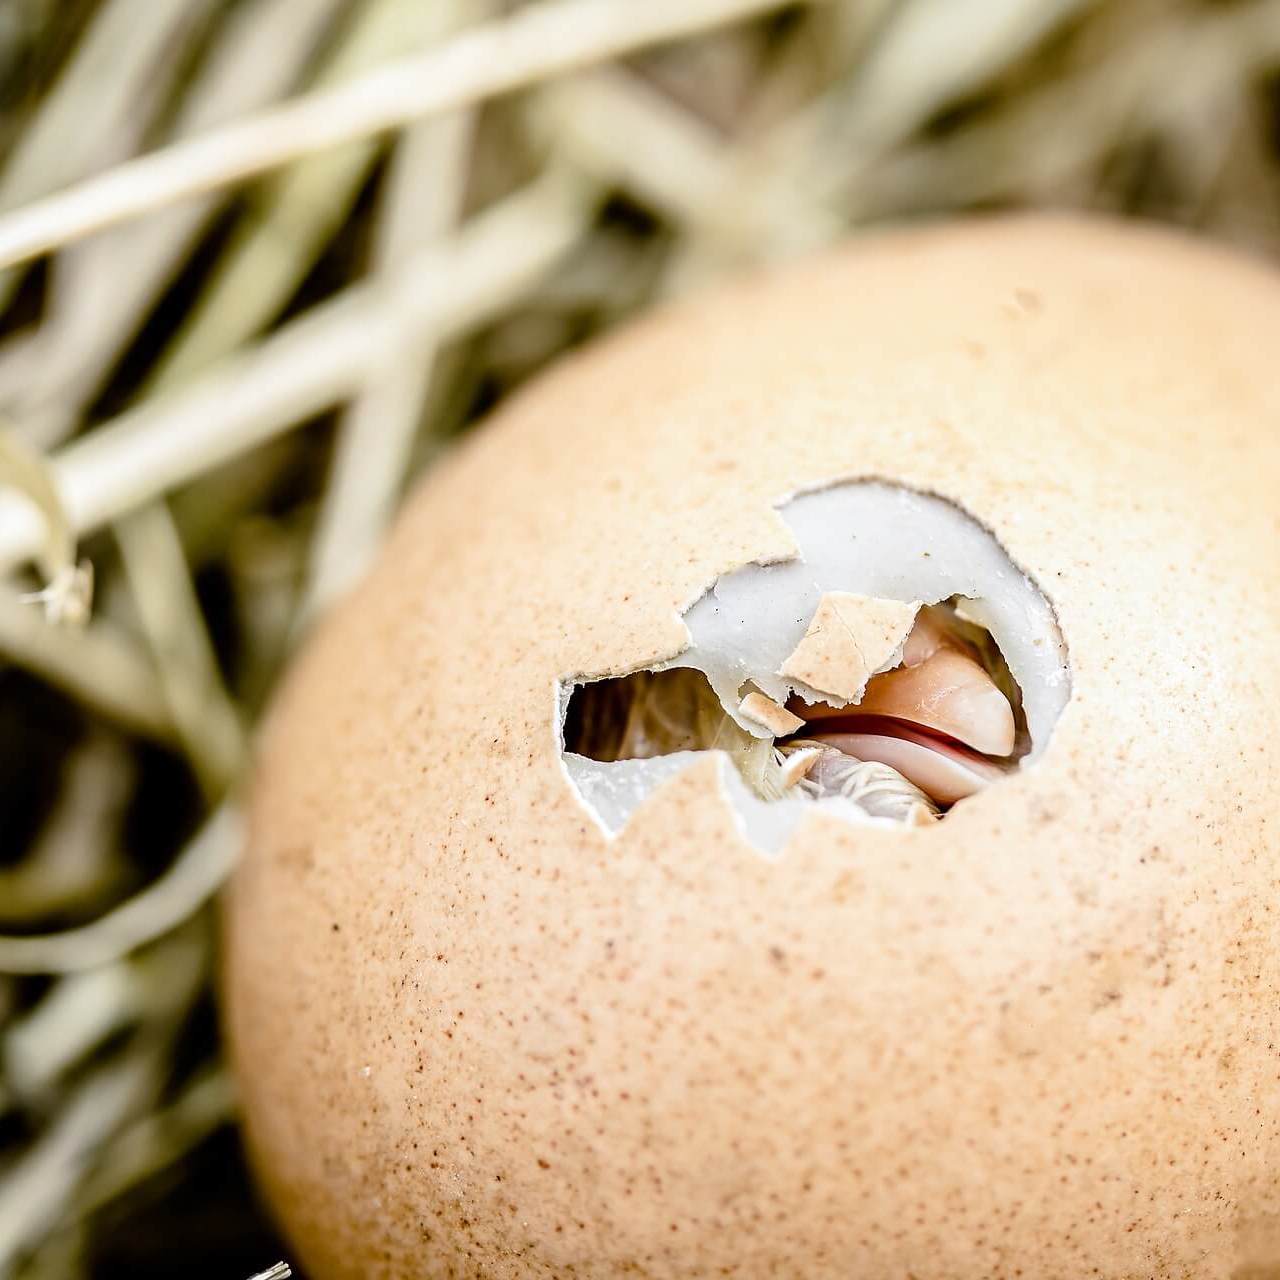 Welfare-conscious consumers are urged to avoid purchasing large eggs